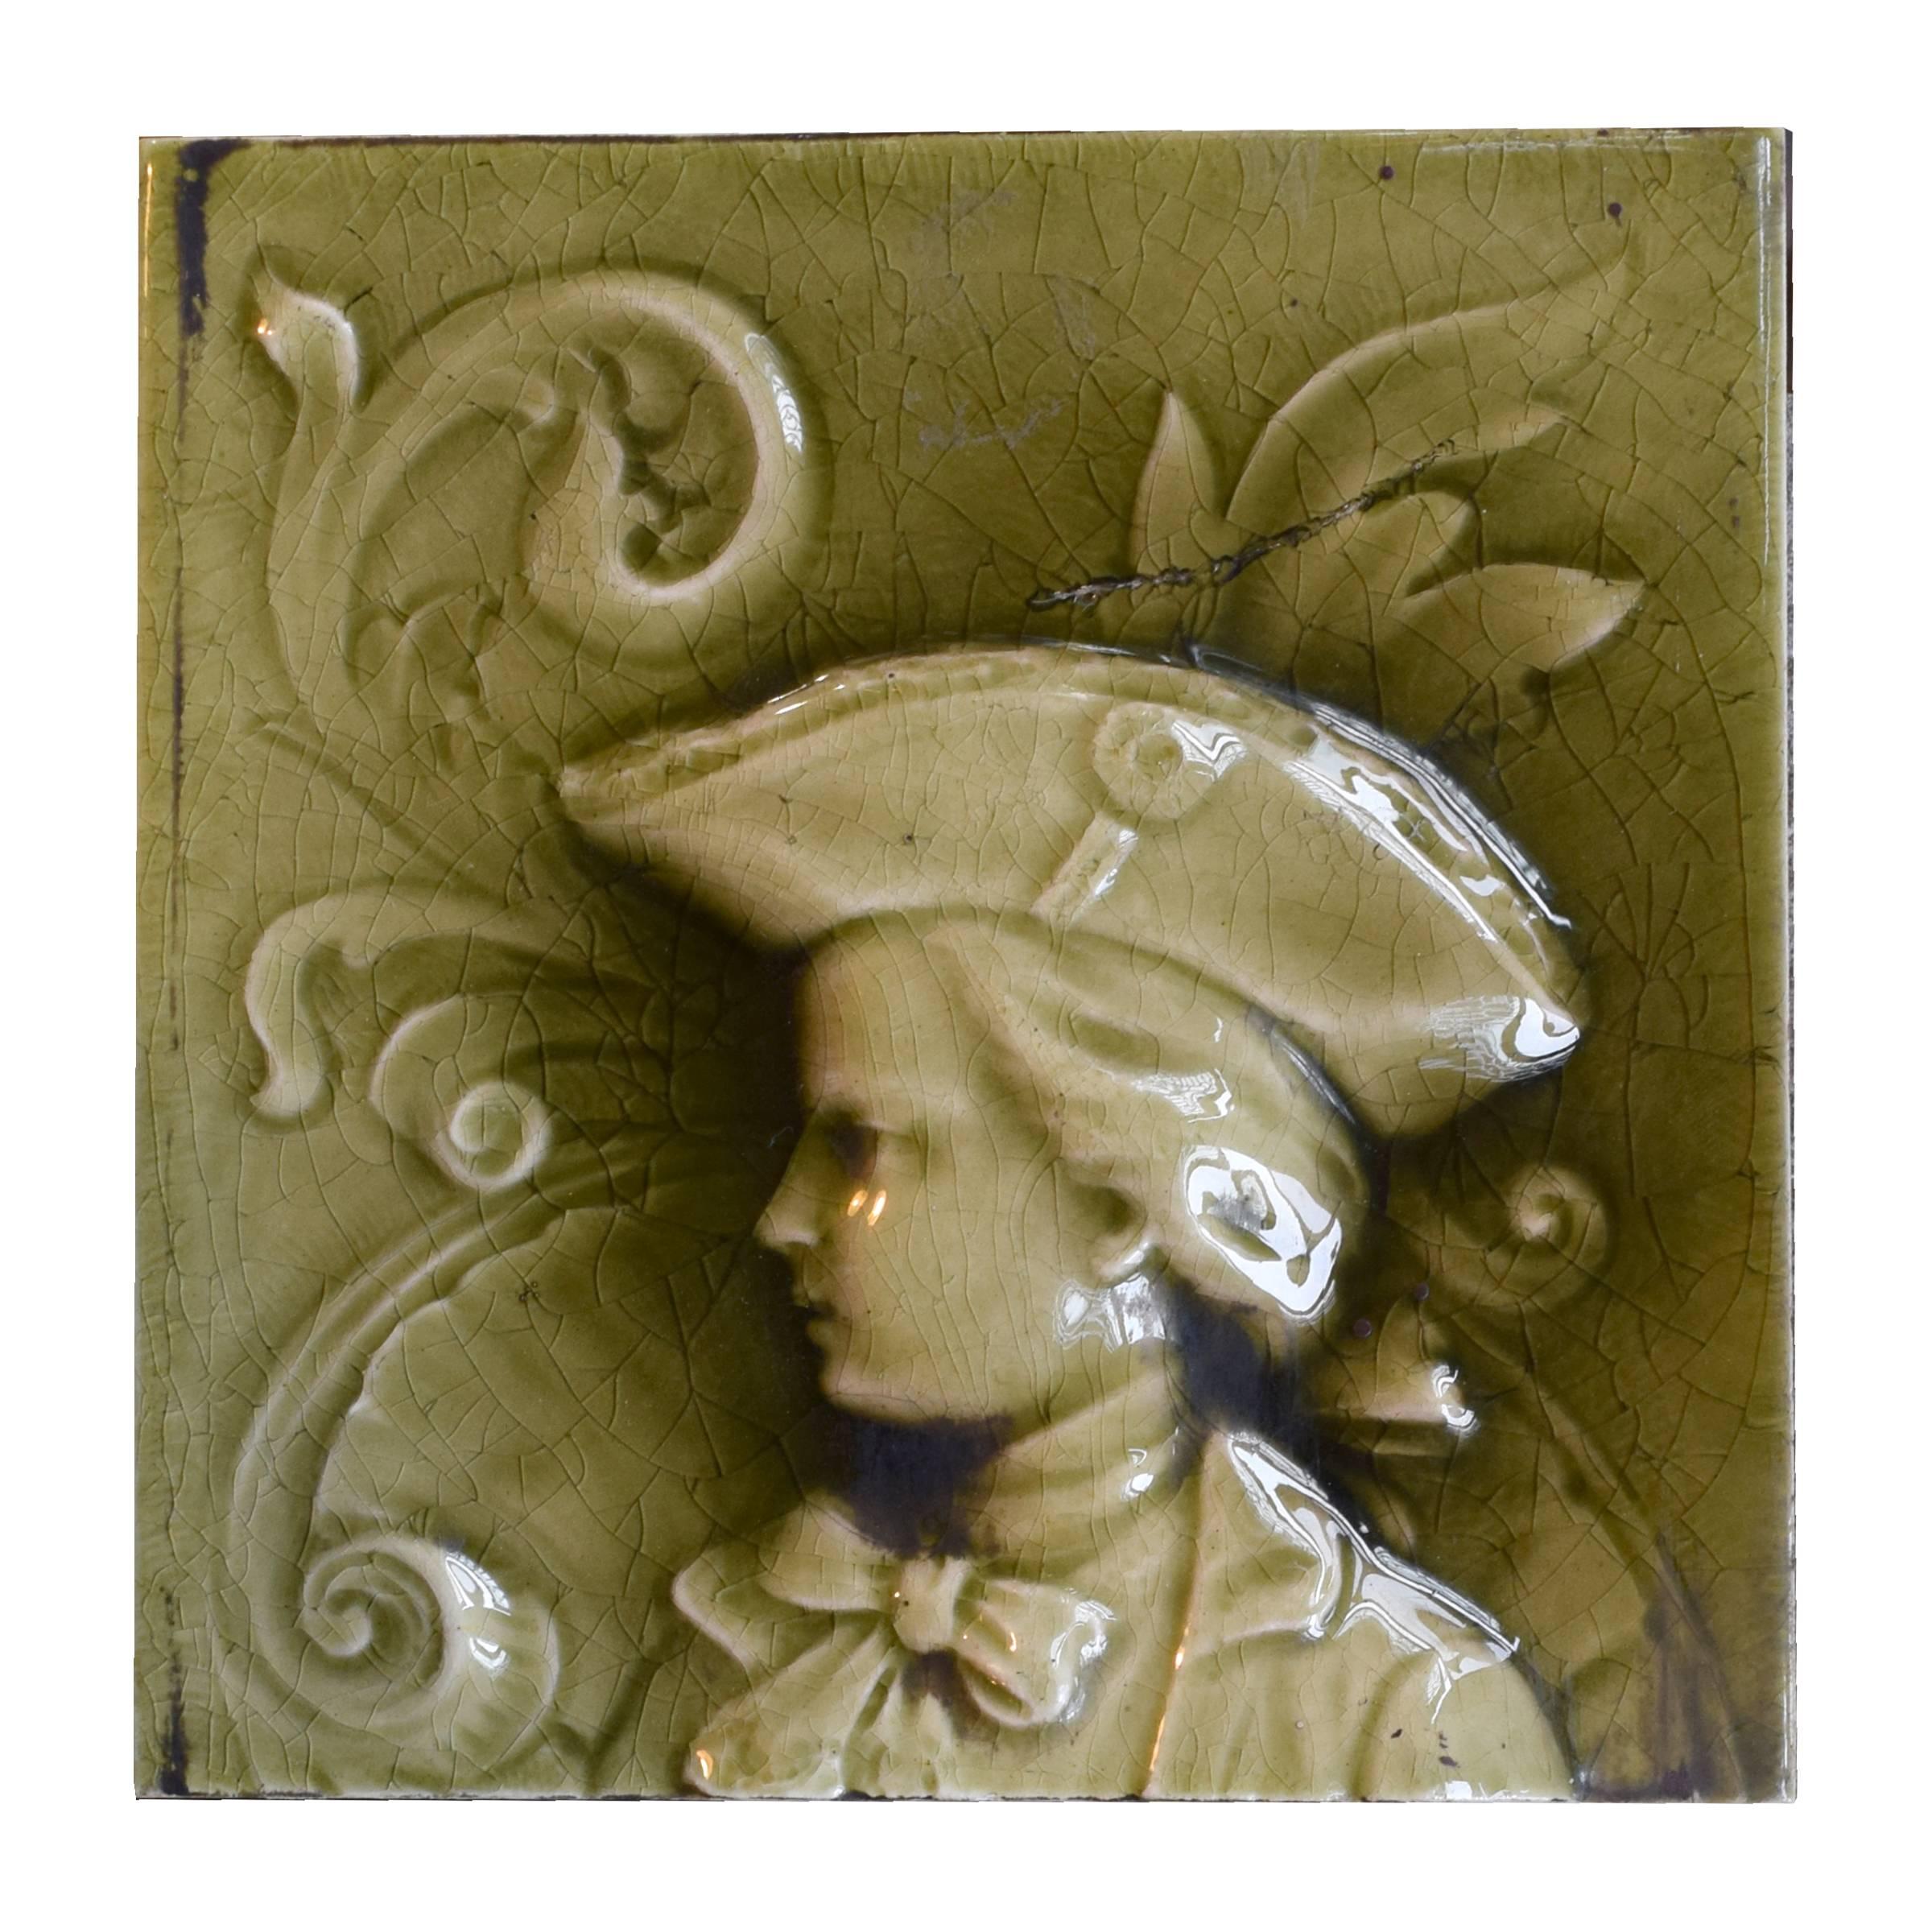 A fabulous three-piece glazed tile set in low relief by the American Encaustic Tiling of Zanesville, OH. depicting a man in 18th century costume. Stamped “A.E. Tile Co. Limited”, late 19th century. The American Encaustic Tiling (1875-1935) was, at